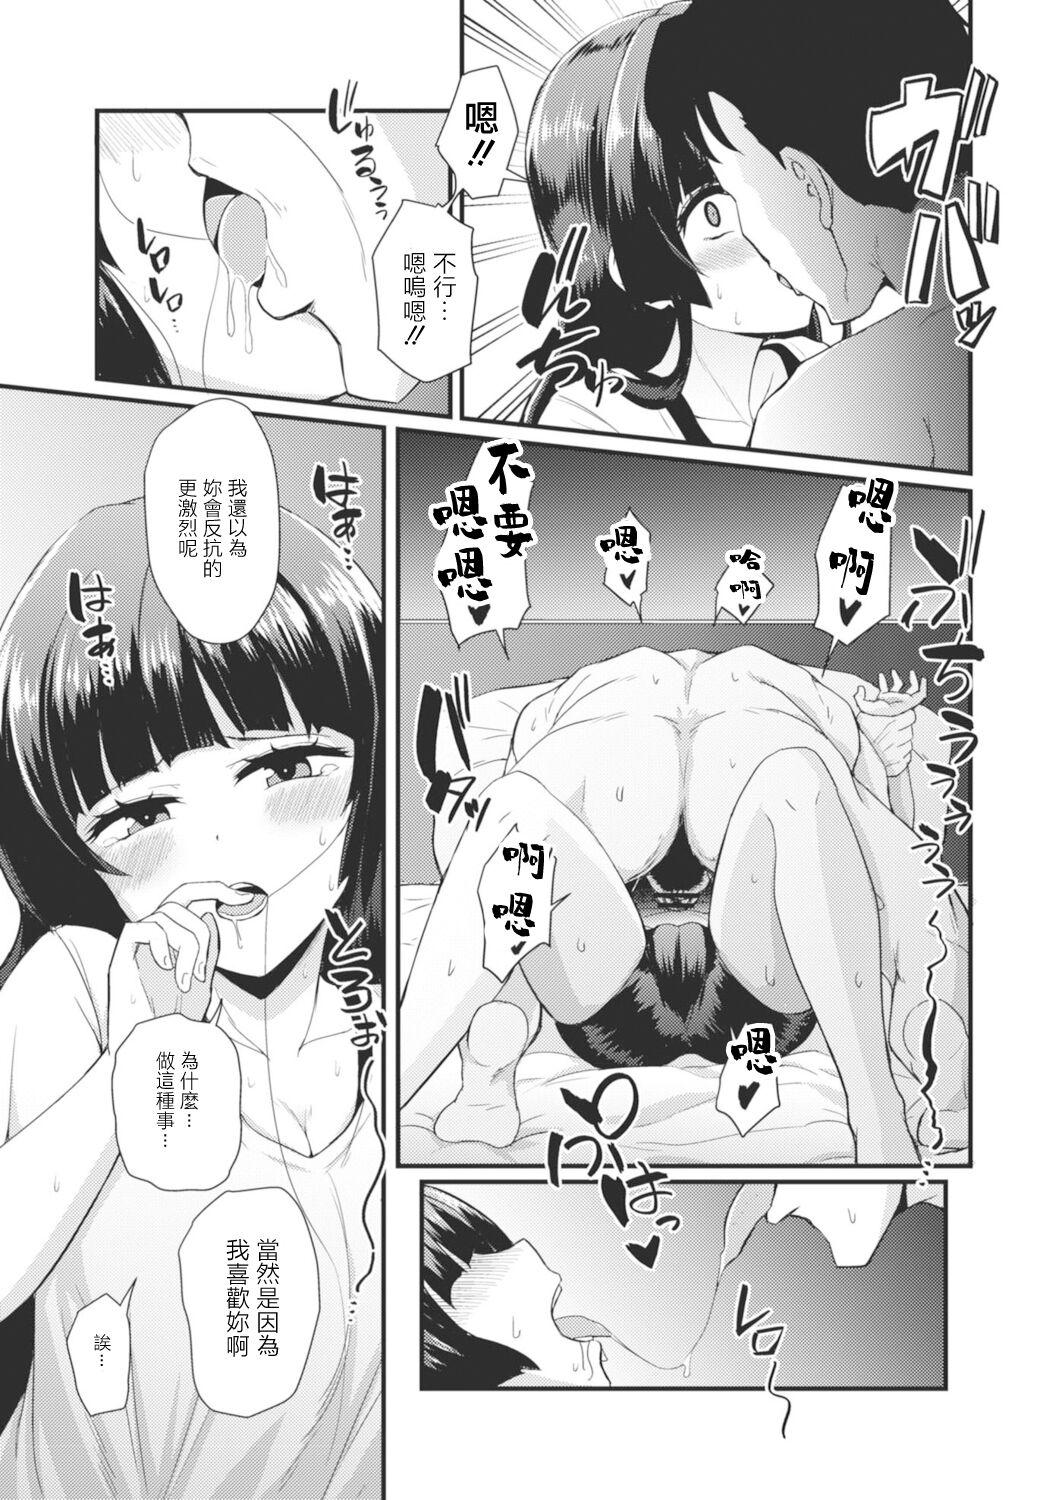 Sex Party 現代色欲夜伽噺 第一夜 かぐやの贖罪 Food - Page 9